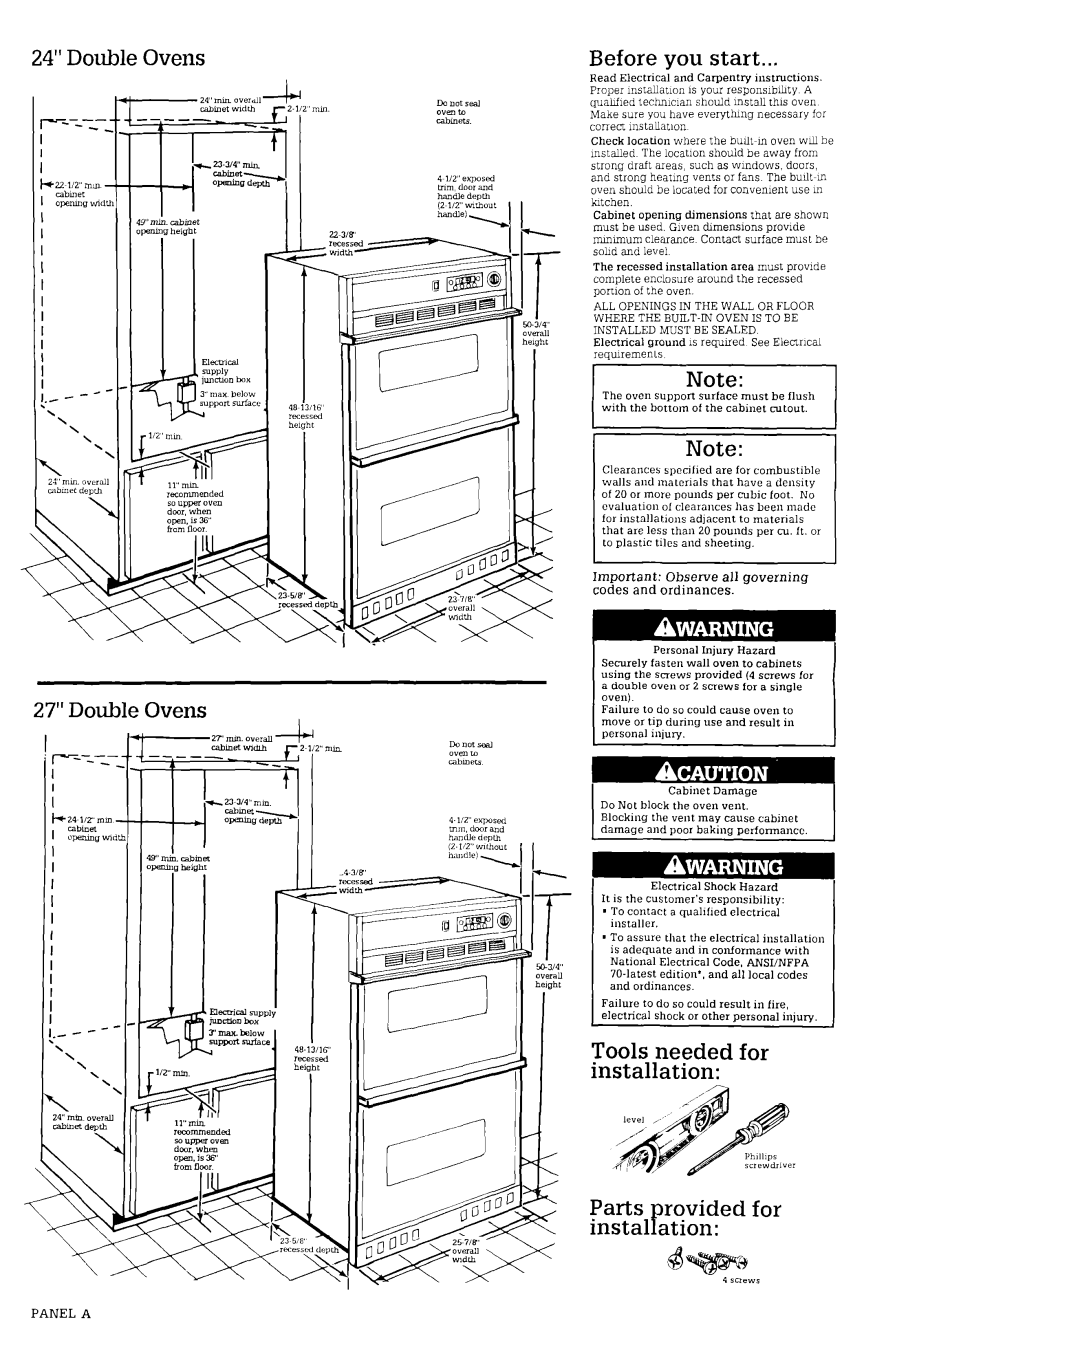 Roper manual 24” Double Ovens 27” Double Ovens, Before you start, Tools needed for installation 